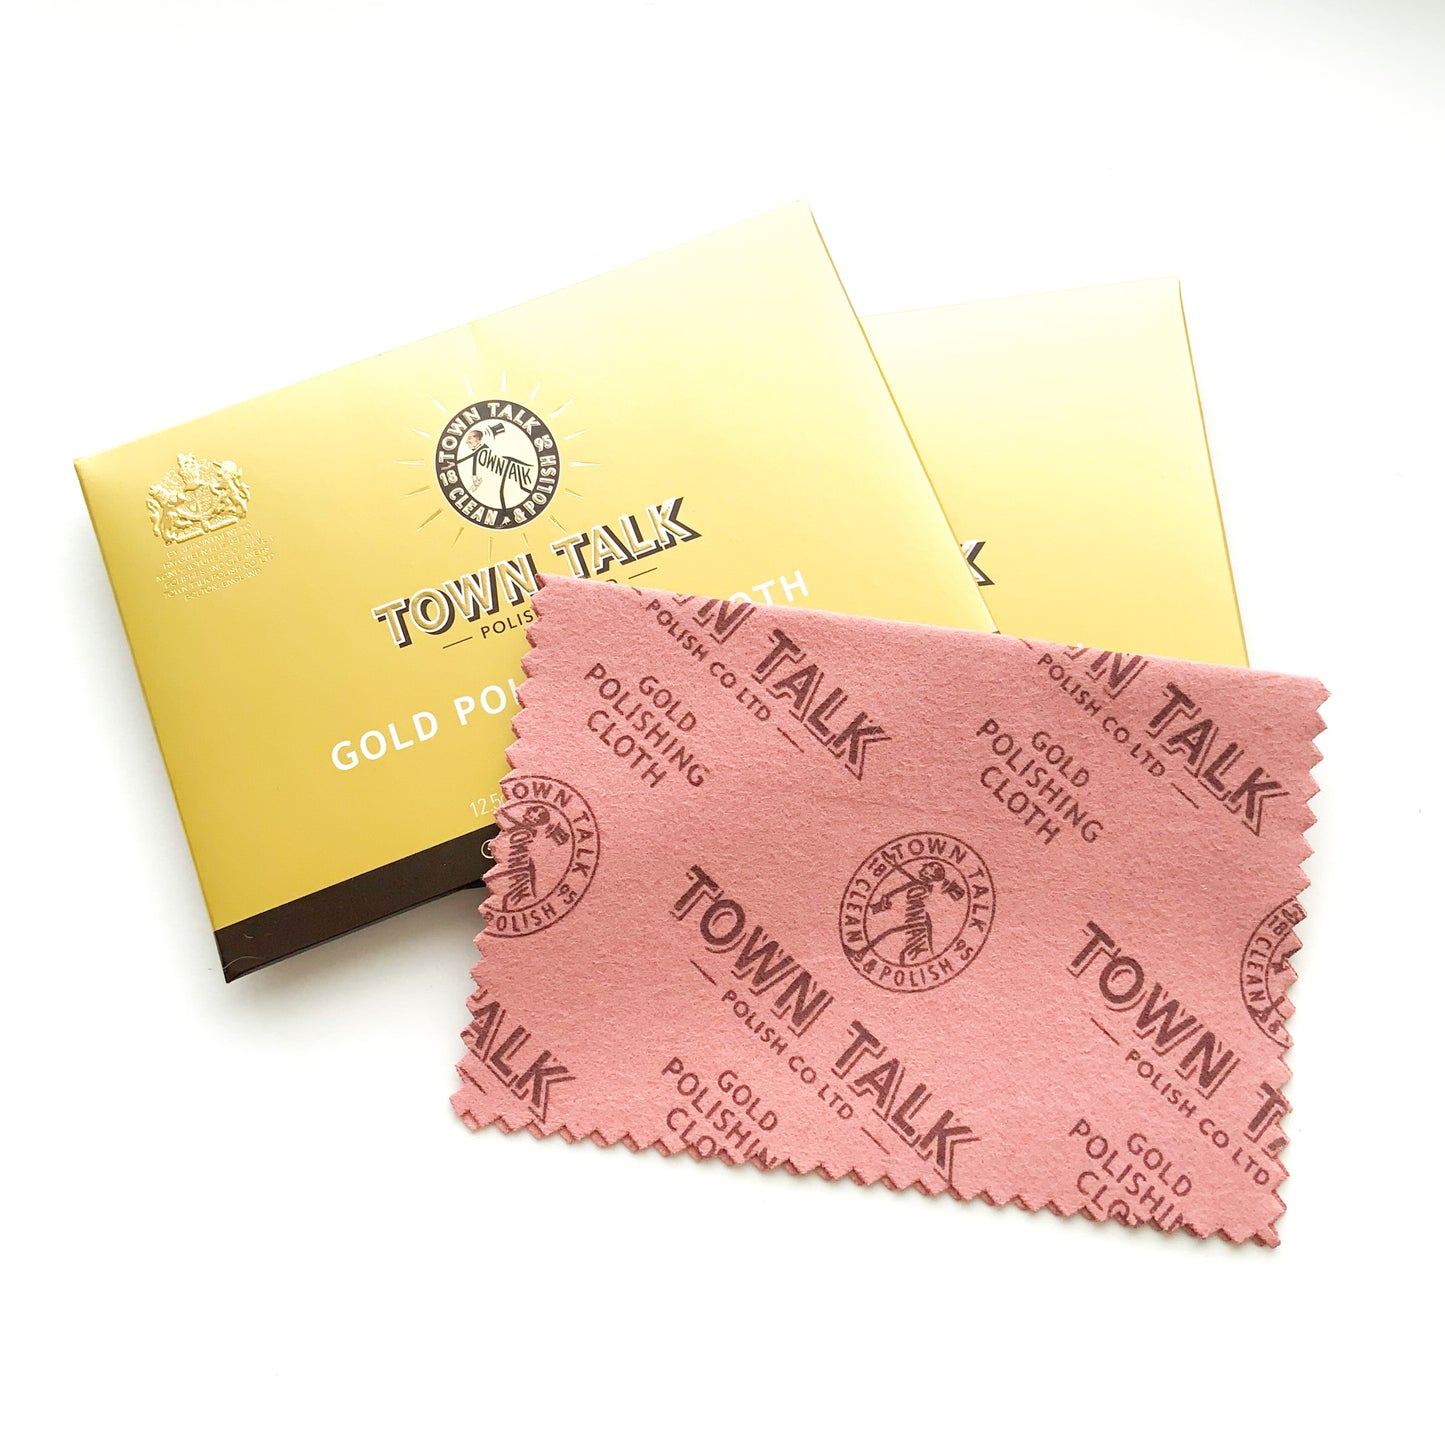 Gold polishing cloth included with your order